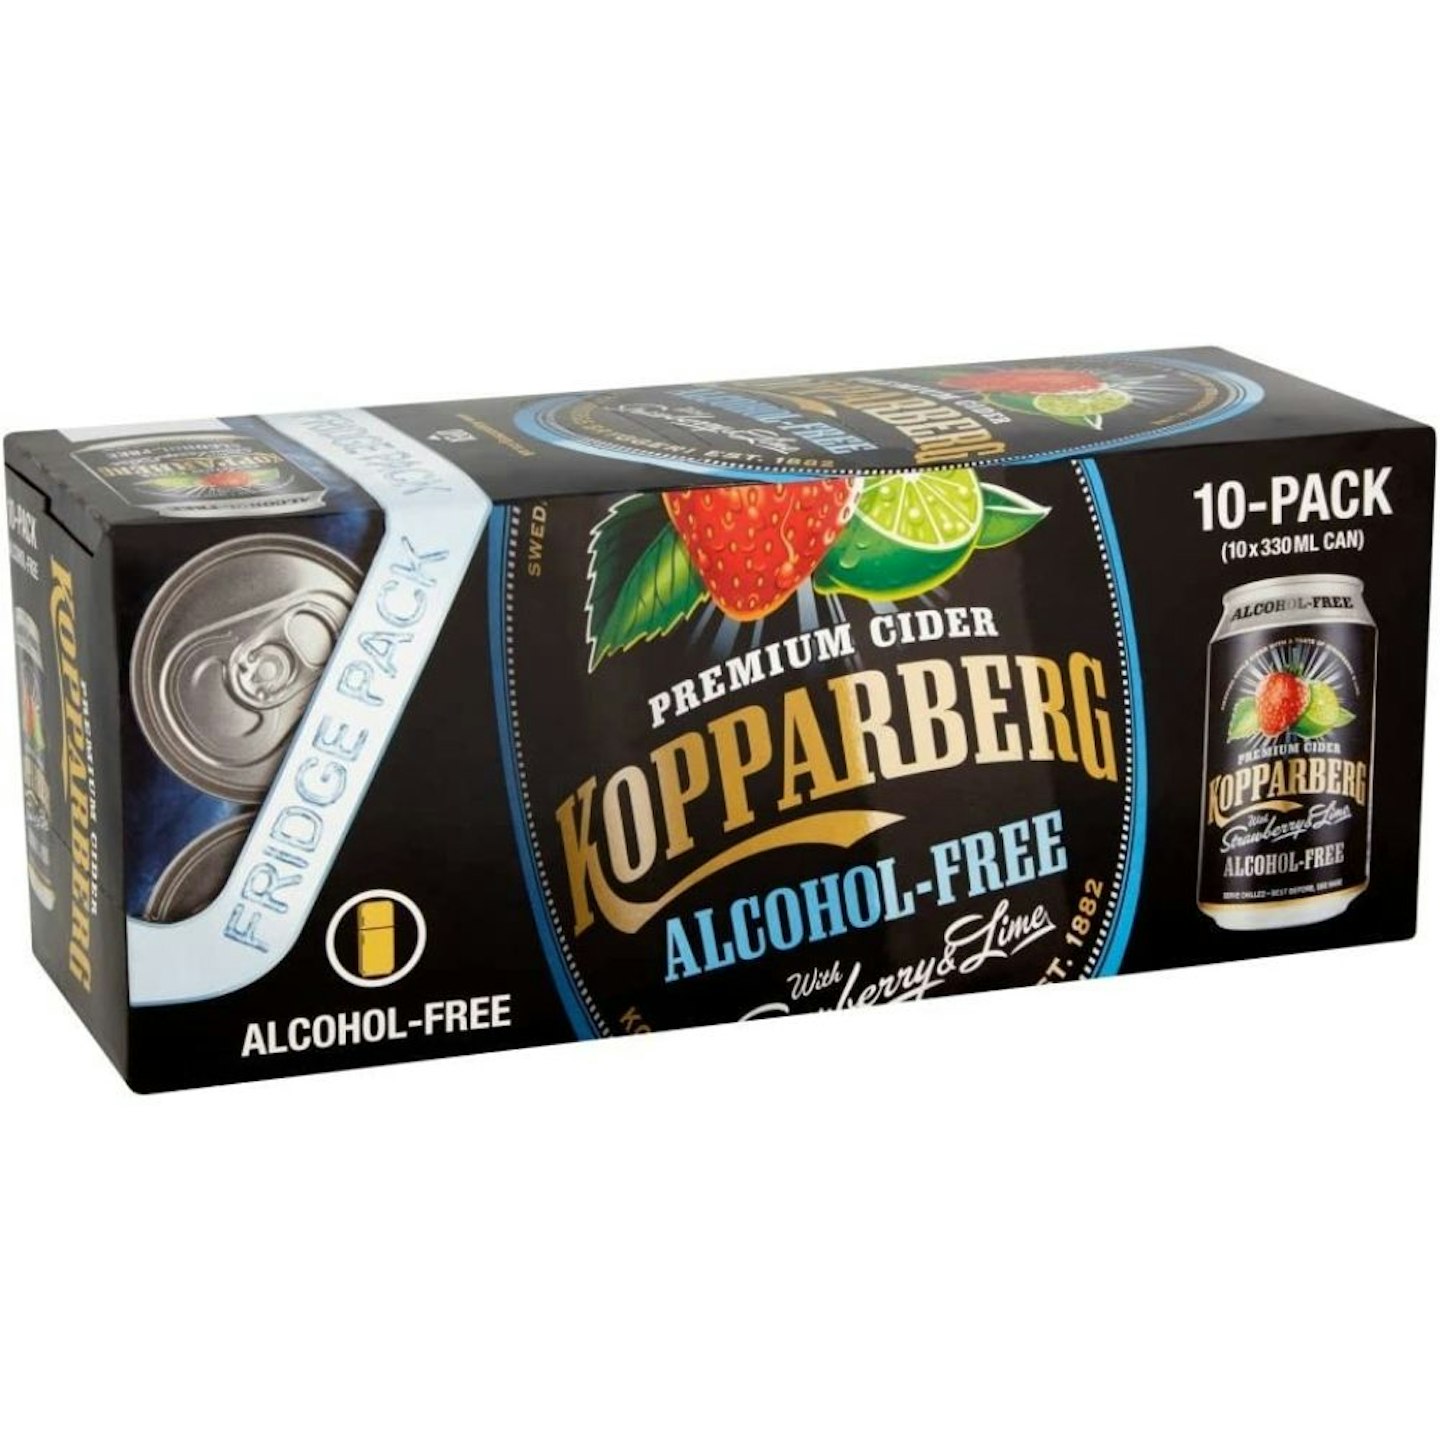  Kopparberg Premium Alcohol Free Cider Strawberry and Lime, 10 x 330ml